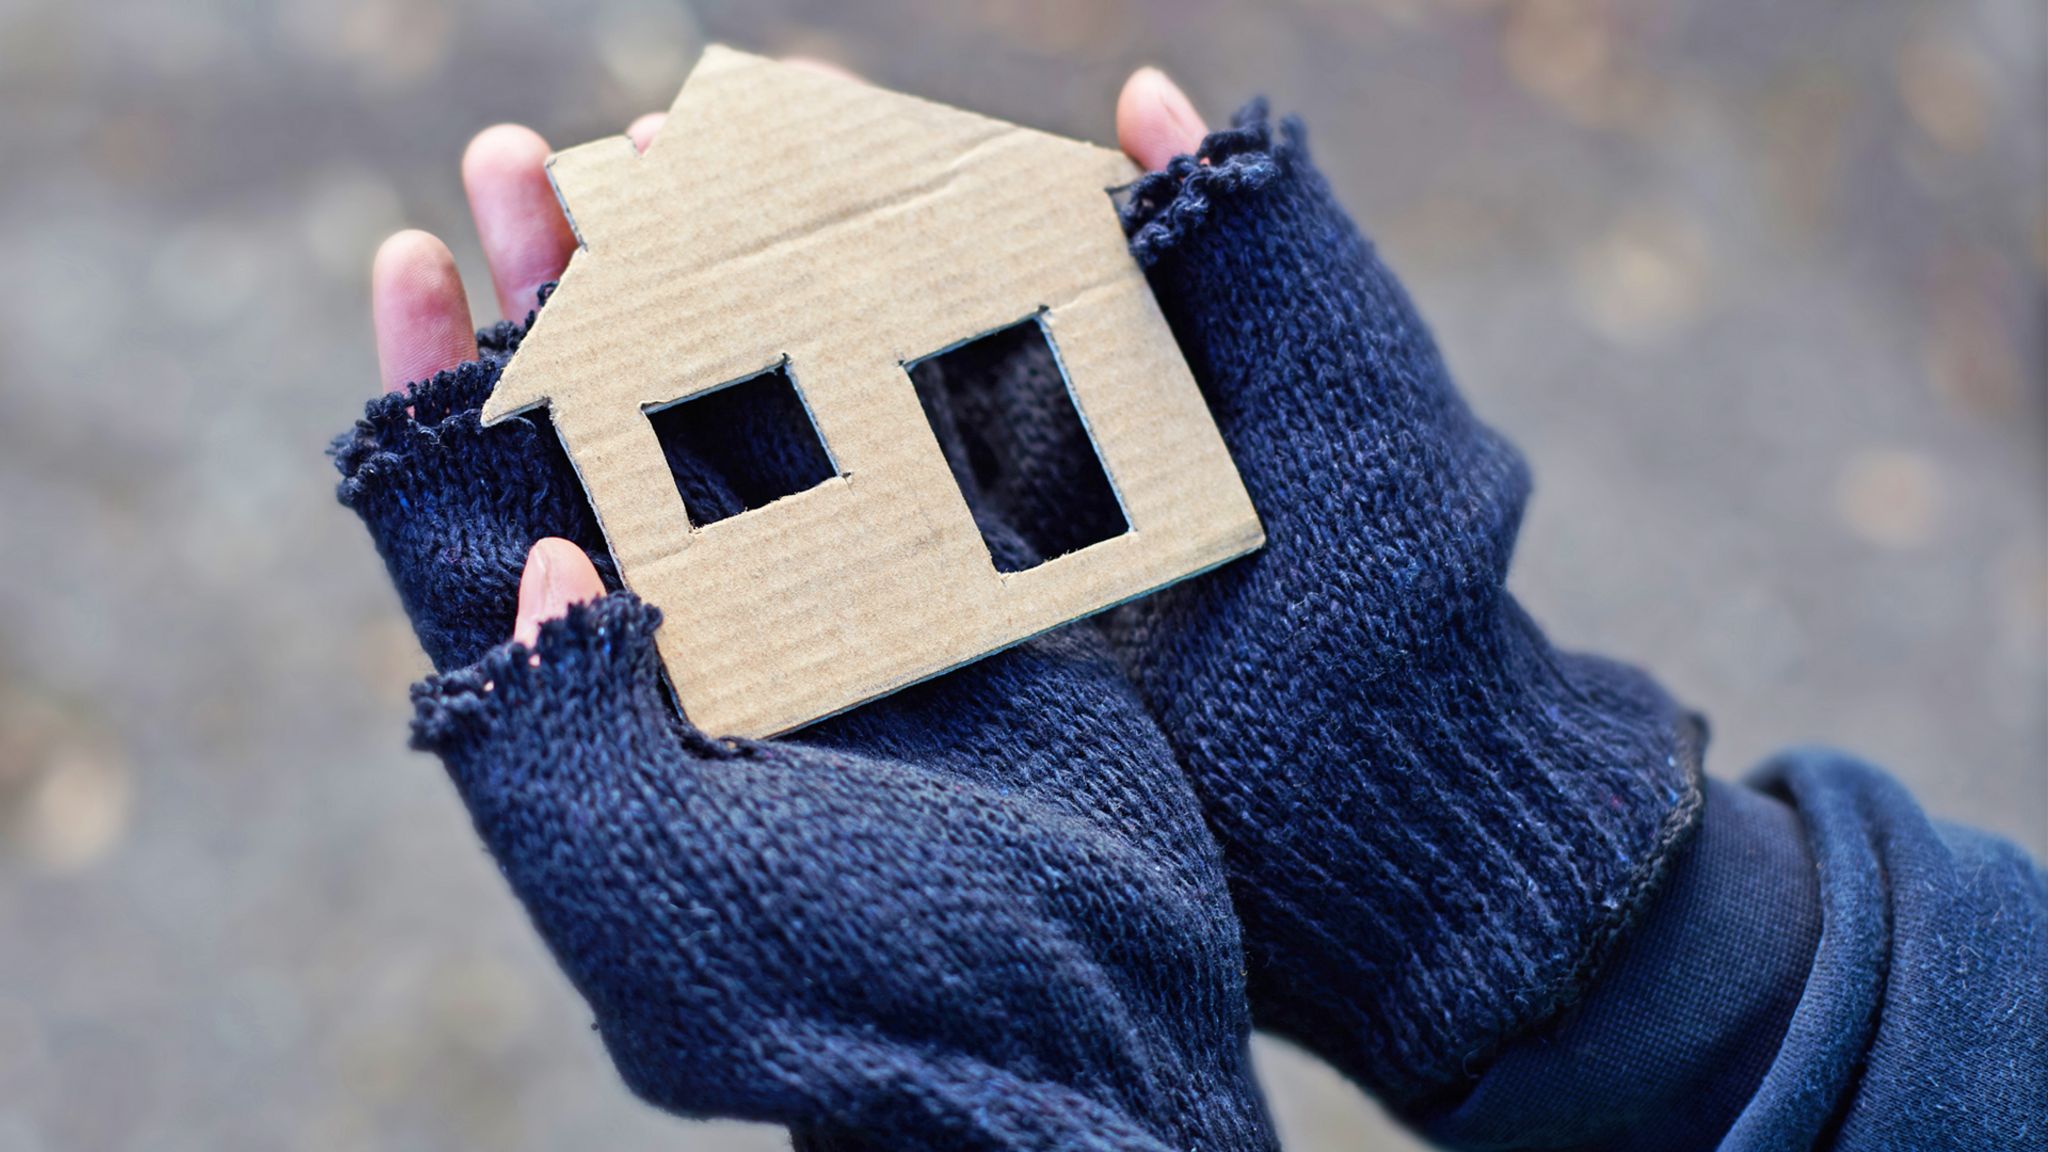 Gloved hands holding a cardboard cut out of a house